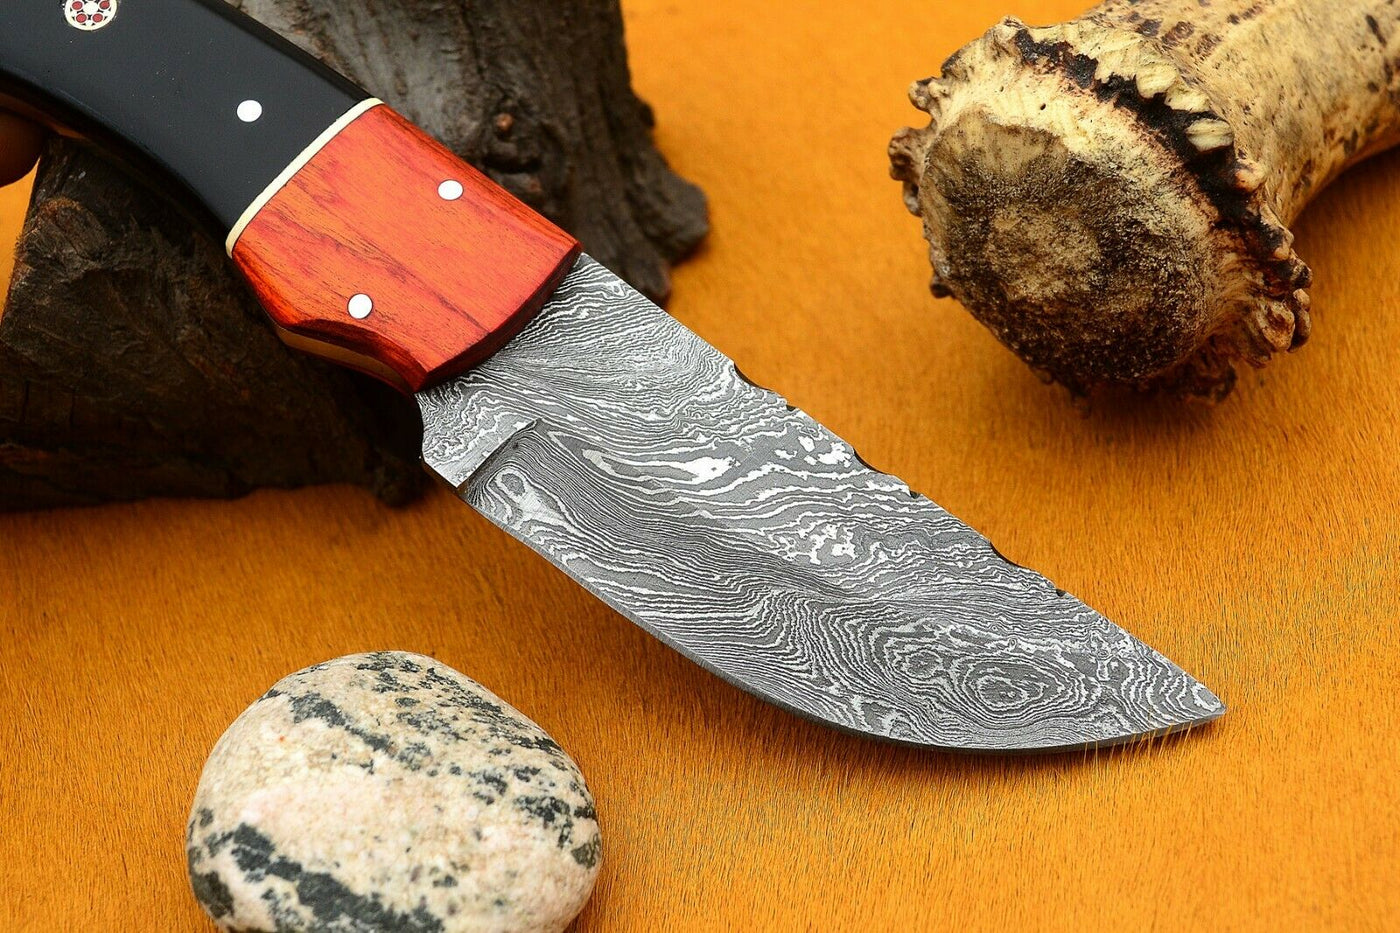 5 Pieces Offer Hunting Skinning Knife Damascus Steel With Knife Sheath SK-013